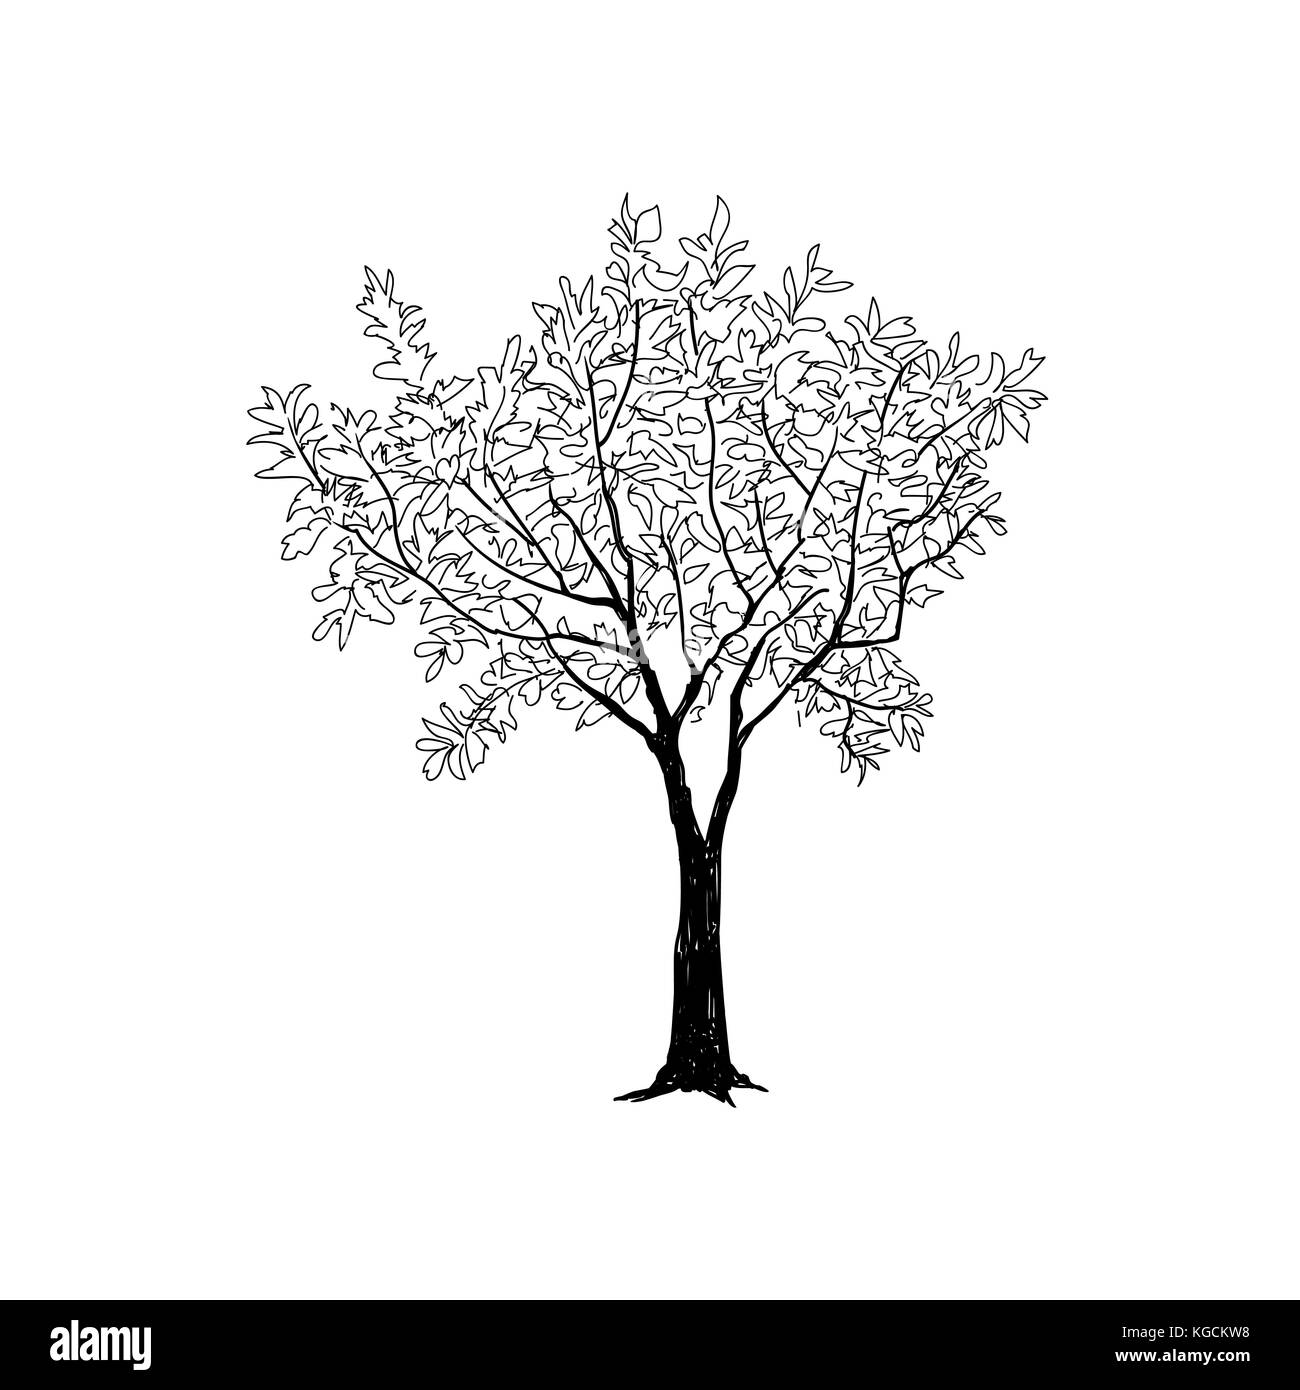 Draw 10 leaves on the tree Coloring Page - Twisty Noodle